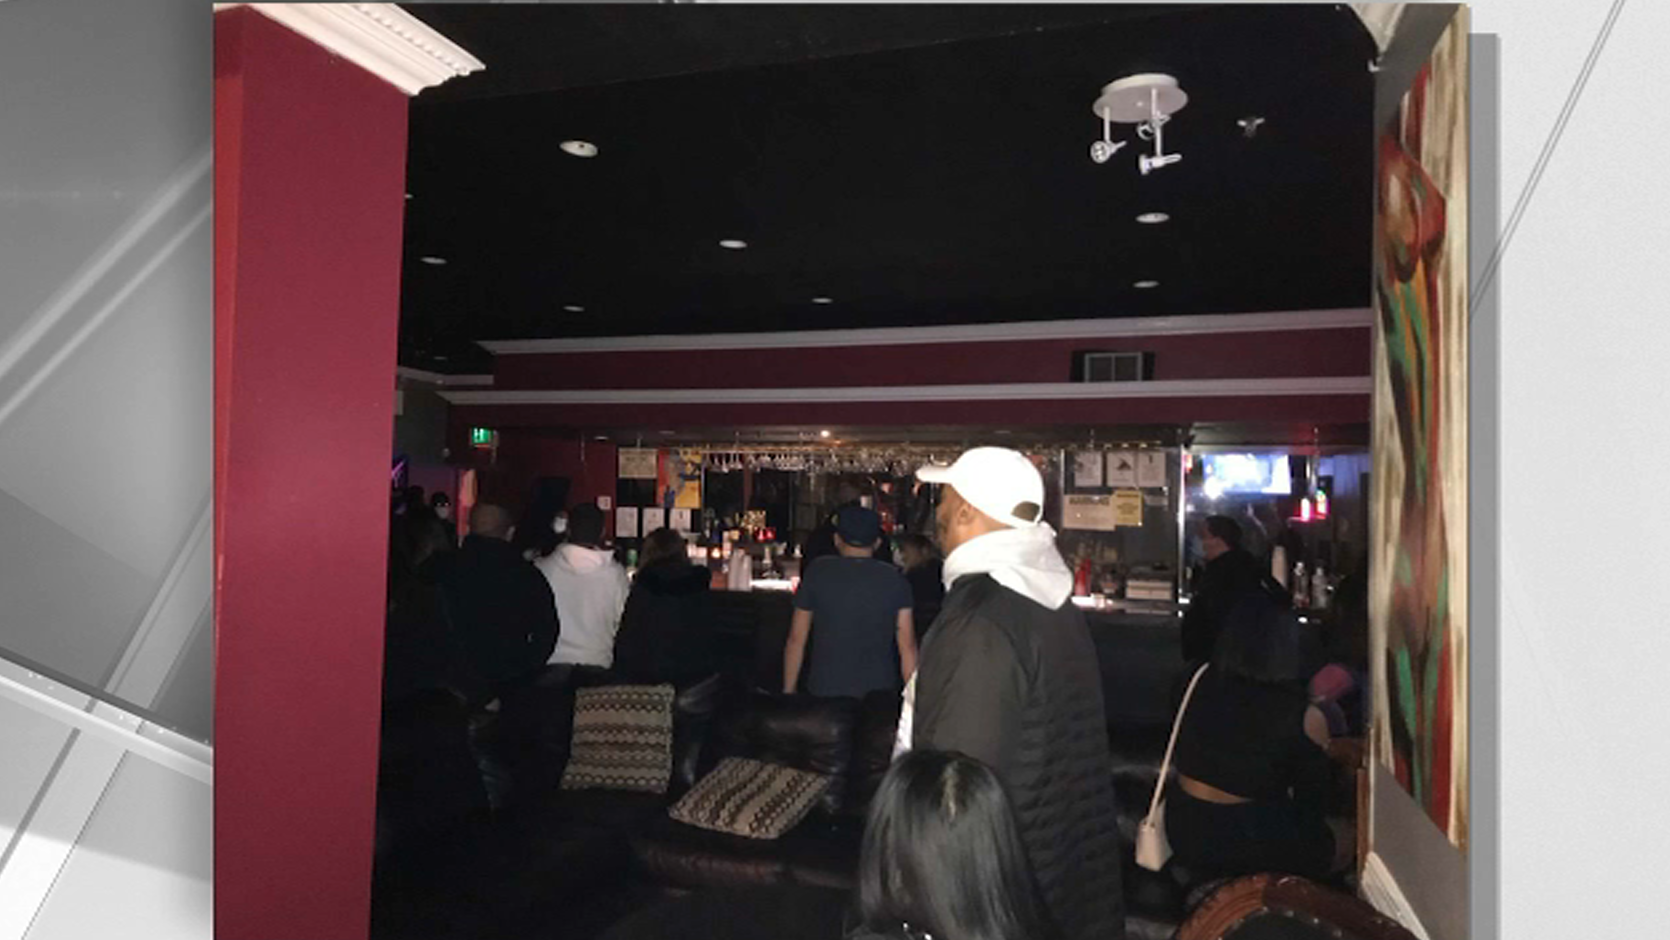 Swingers Club in Queens Latest Illicit Gathering Broken Up by NYC Sheriffs  picture image picture